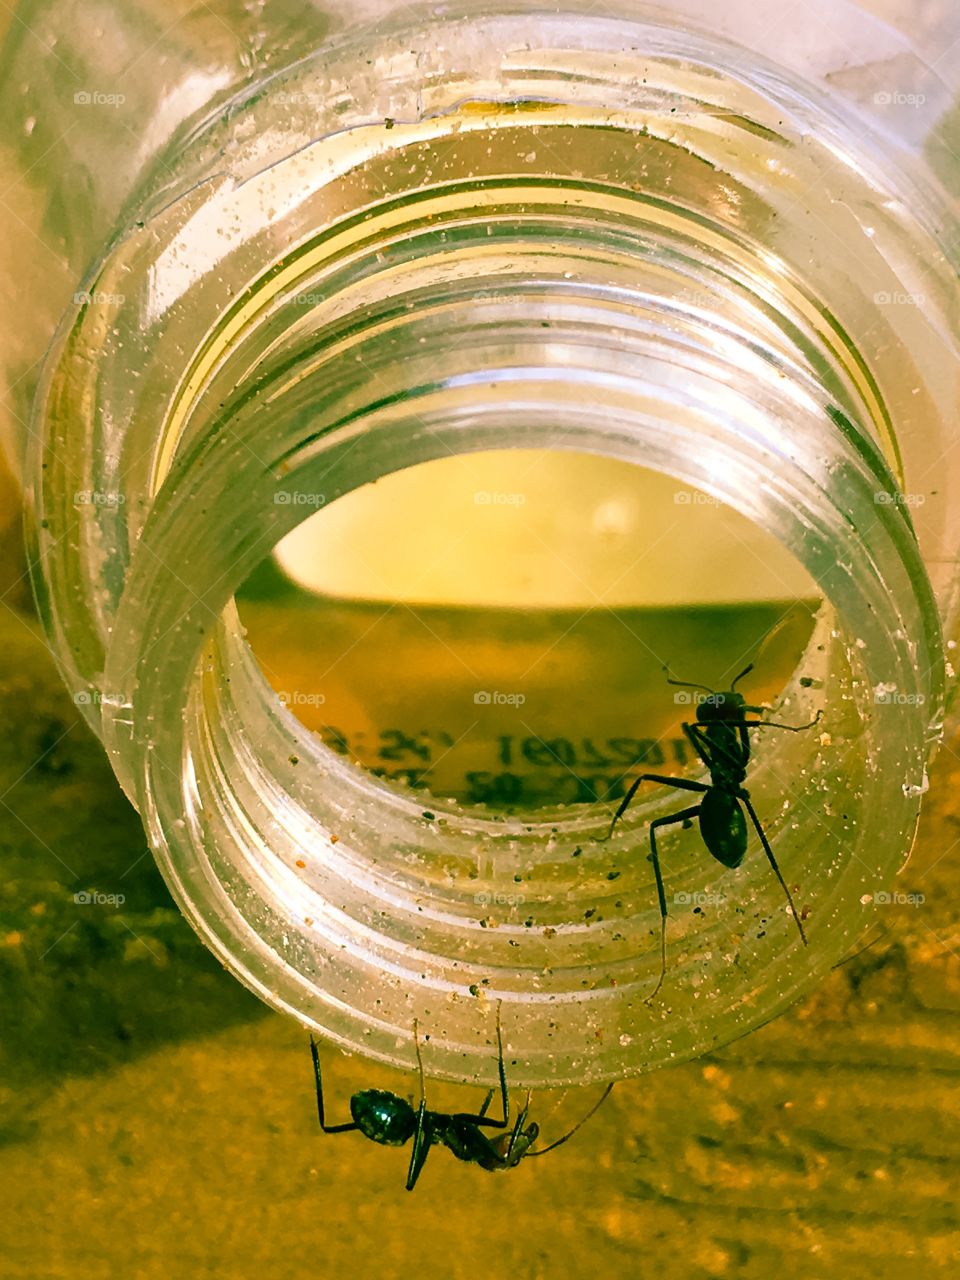 Worker ants crawling inside and outside glass jar polar tone 